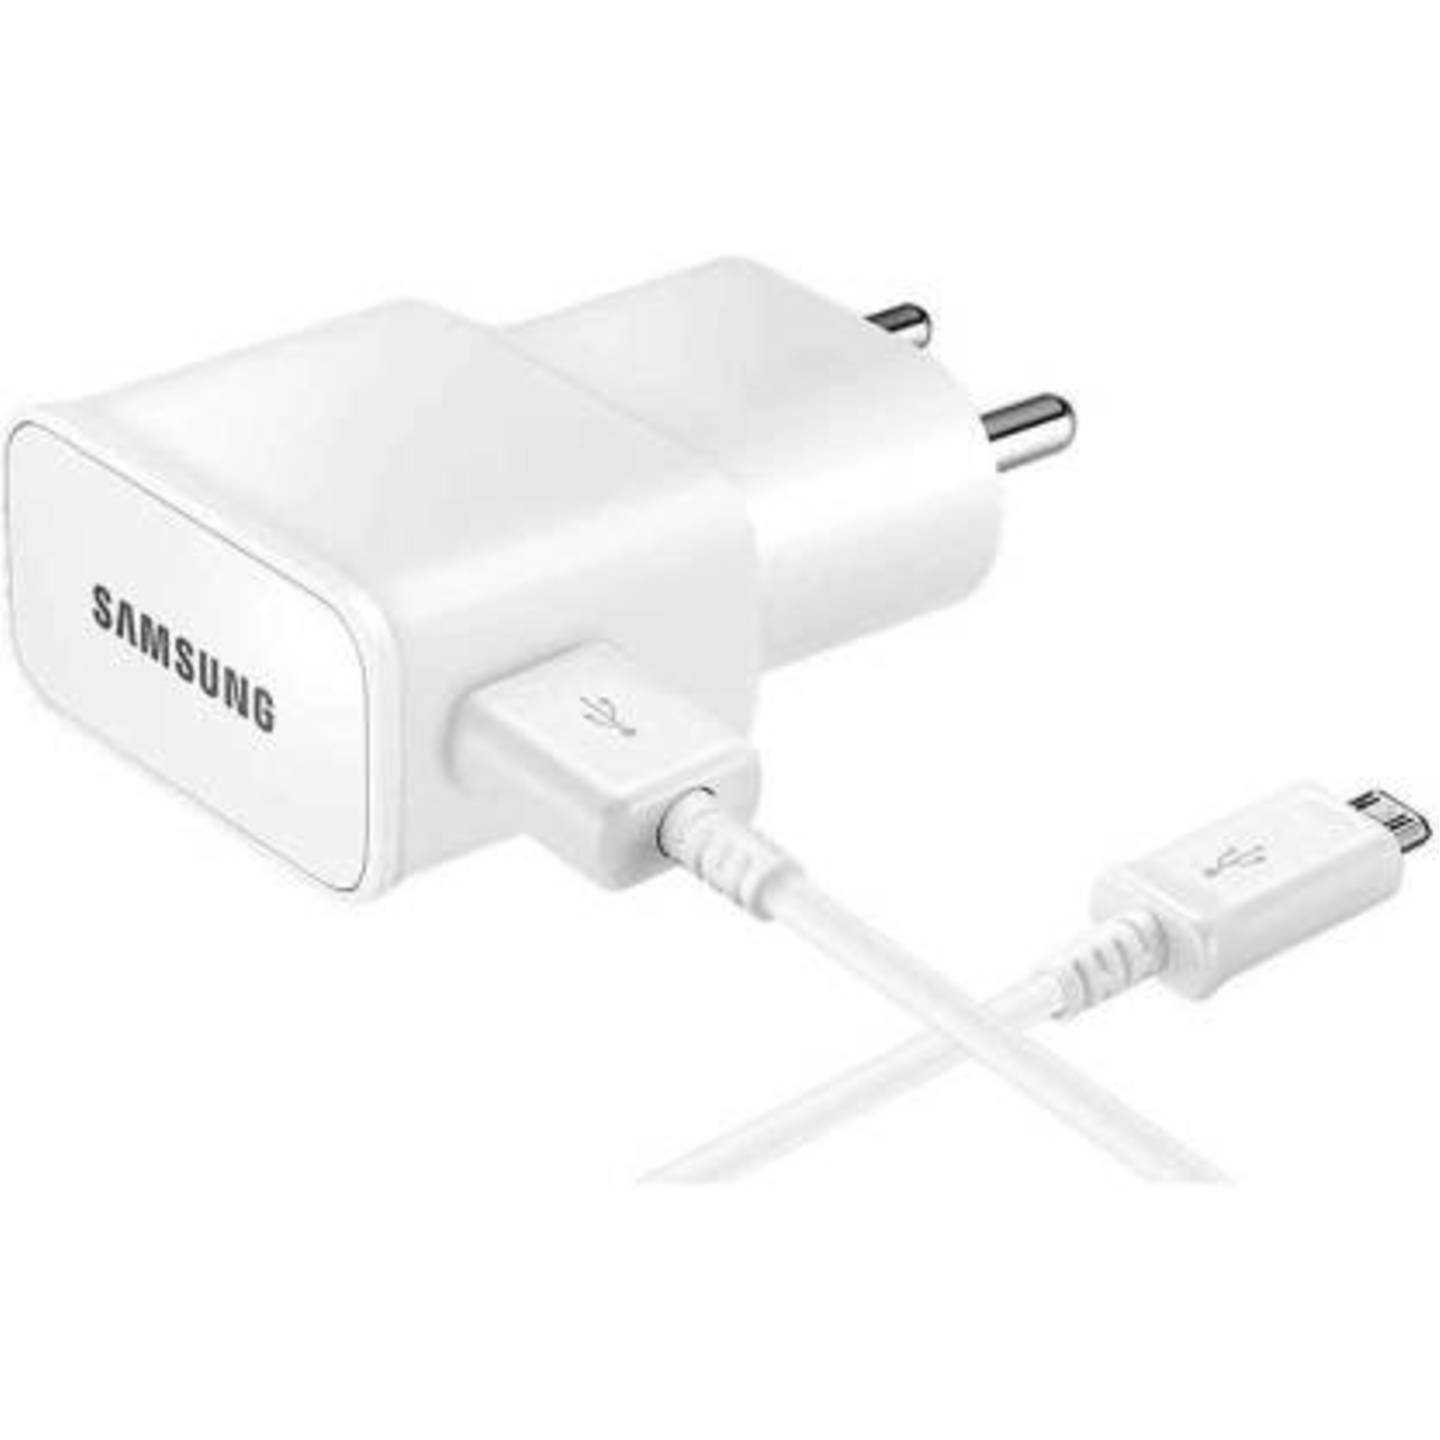 Samsung TA20IW Fast 1 A Mobile Charger with Detachable Cable  White